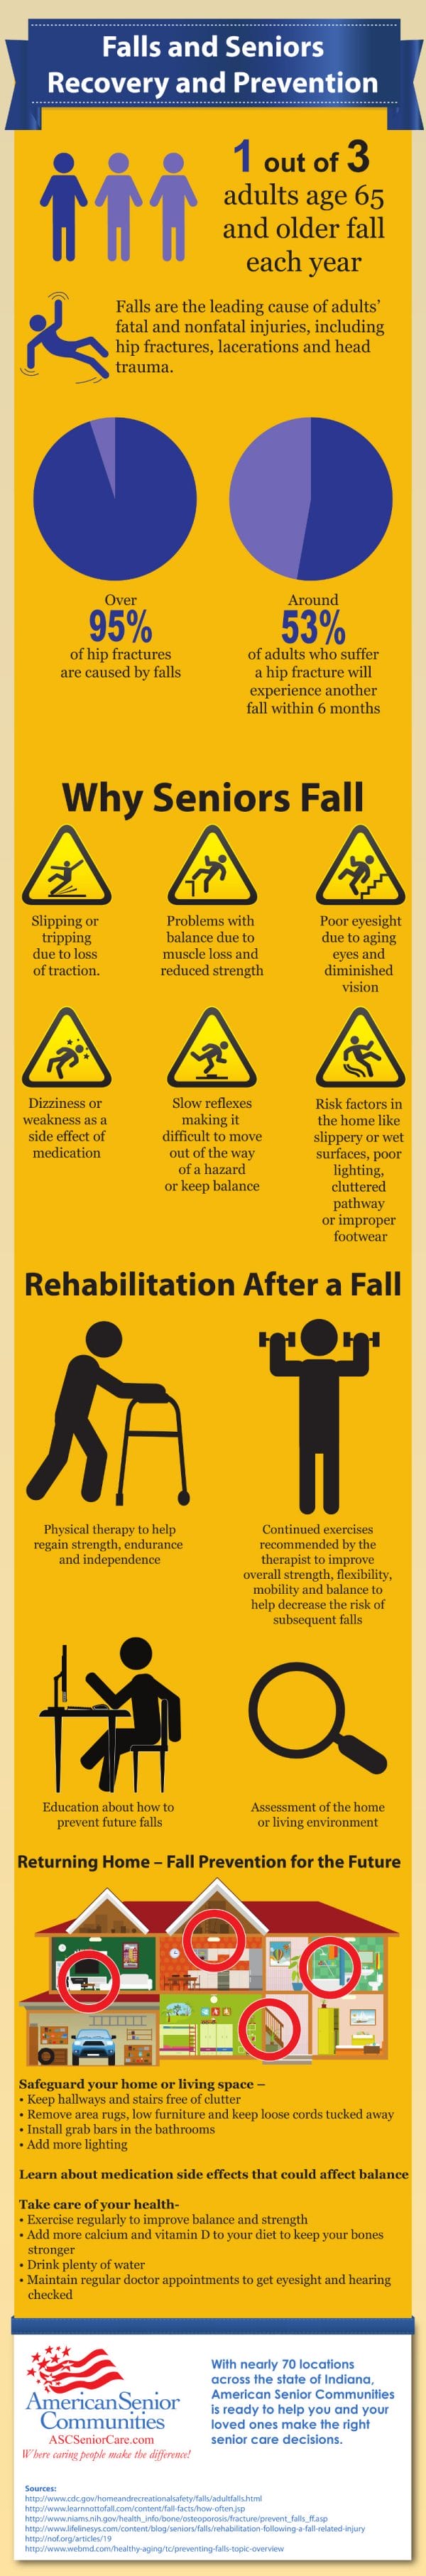 Falls and Seniors: Recovery and Prevention